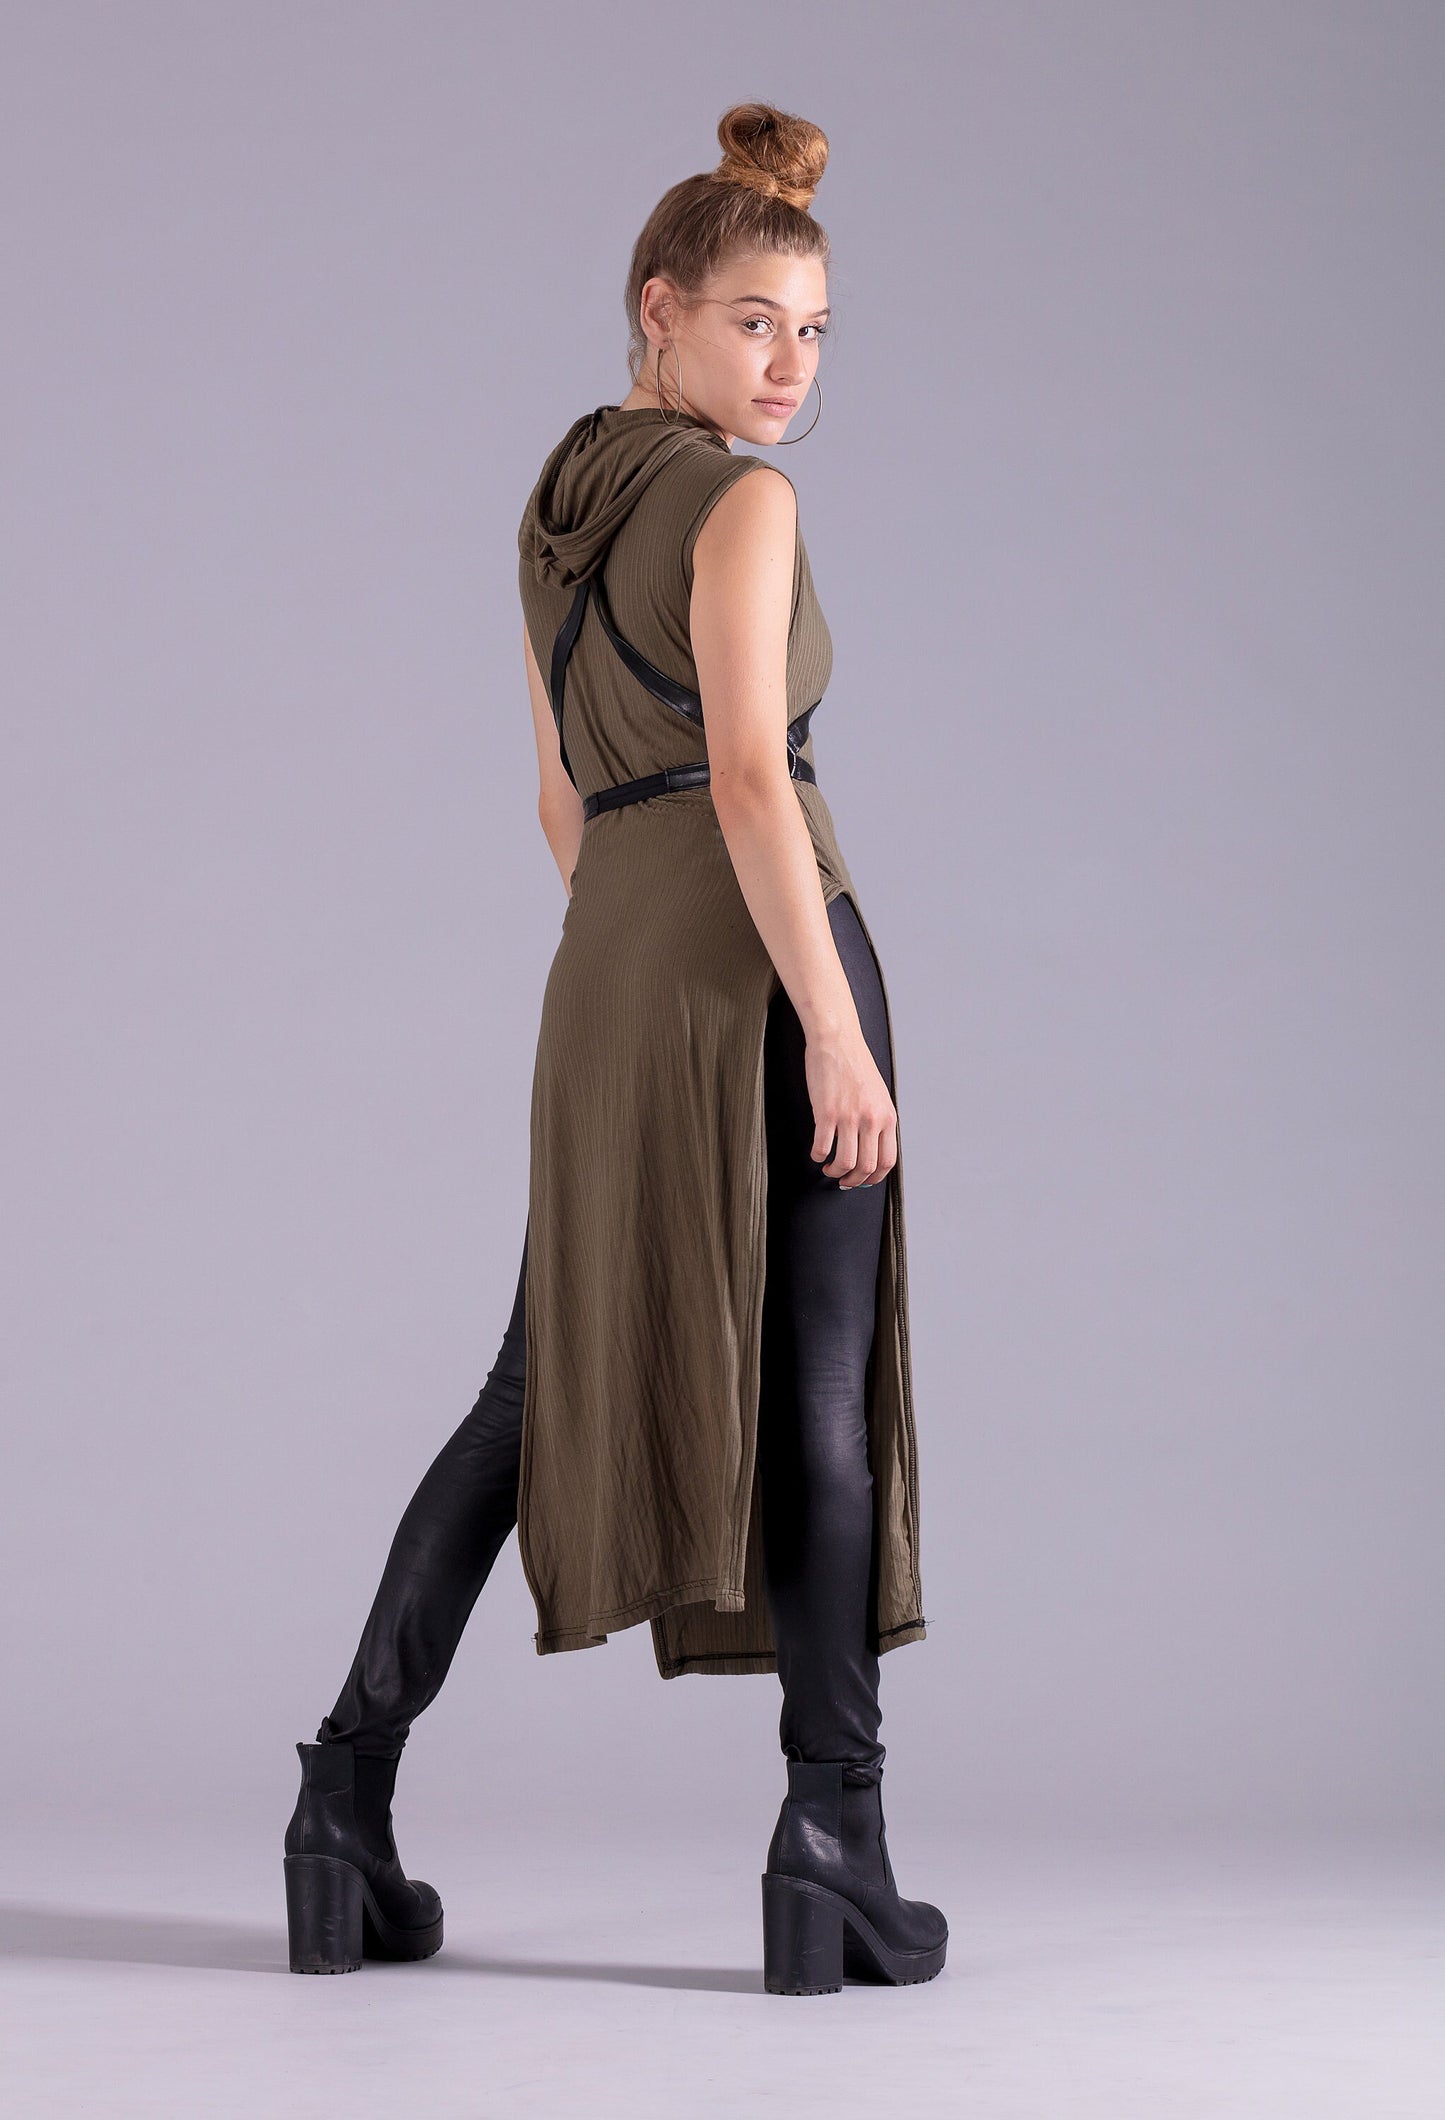 Warrior post apocalyptic hooded tunic dress | Olive